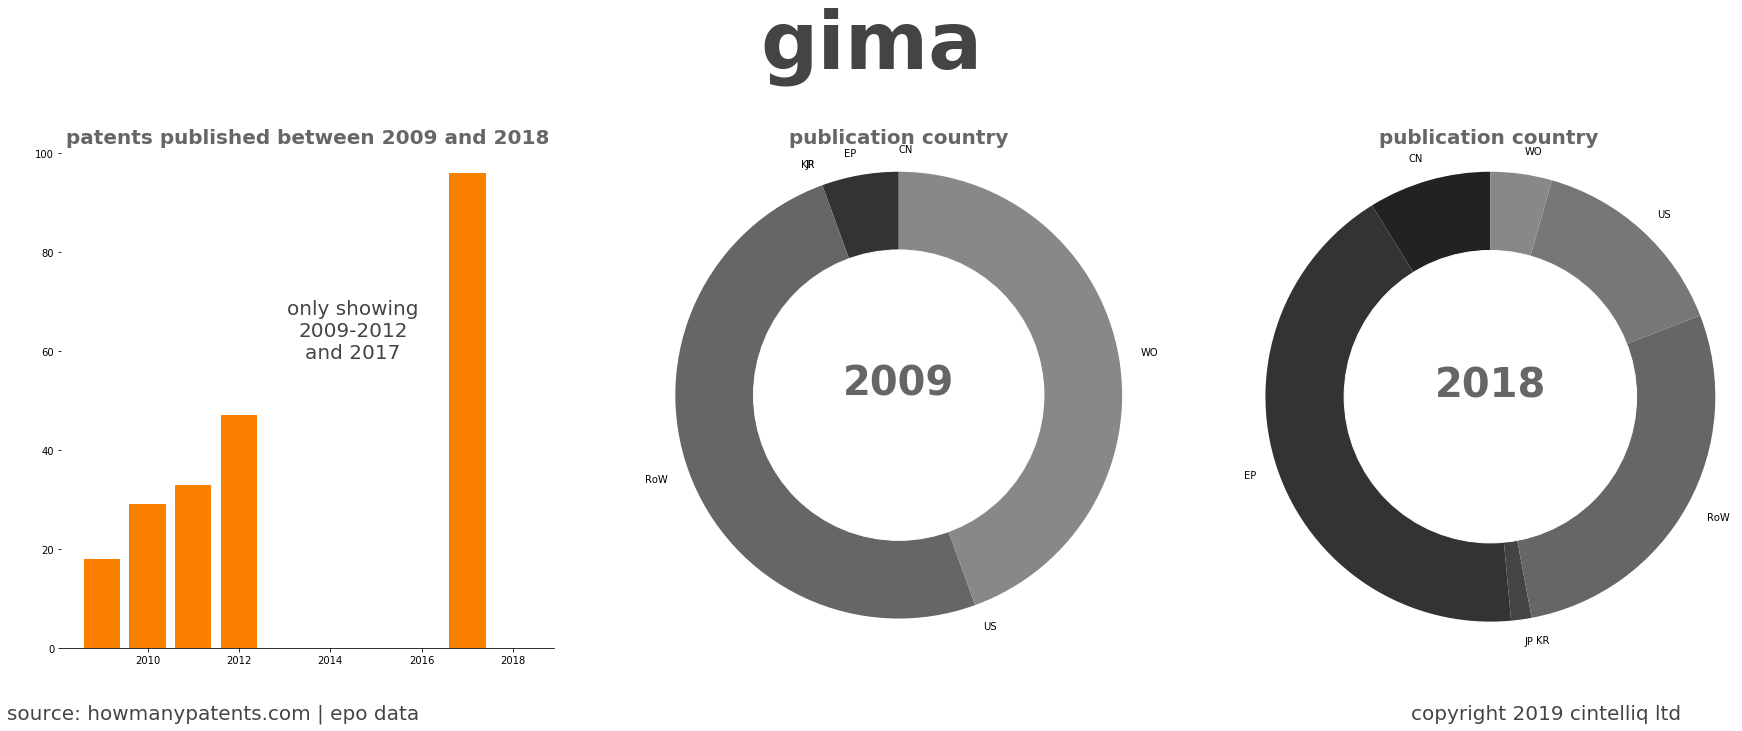 summary of patents for Gima